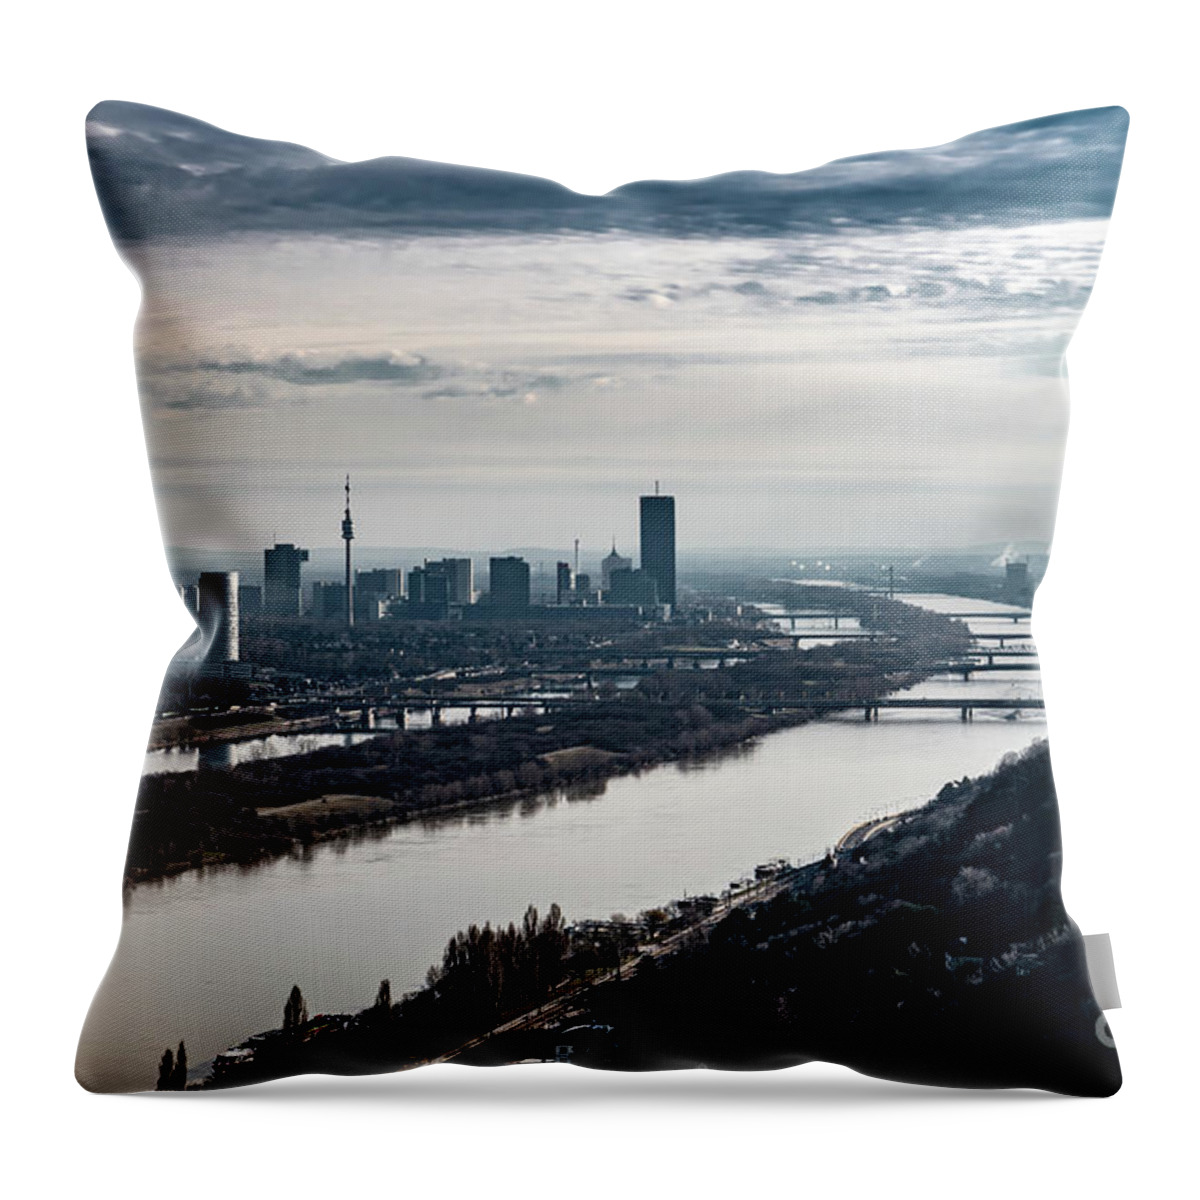 Aerial Throw Pillow featuring the photograph City Of Vienna With Suburbs And River Danube In Austria by Andreas Berthold